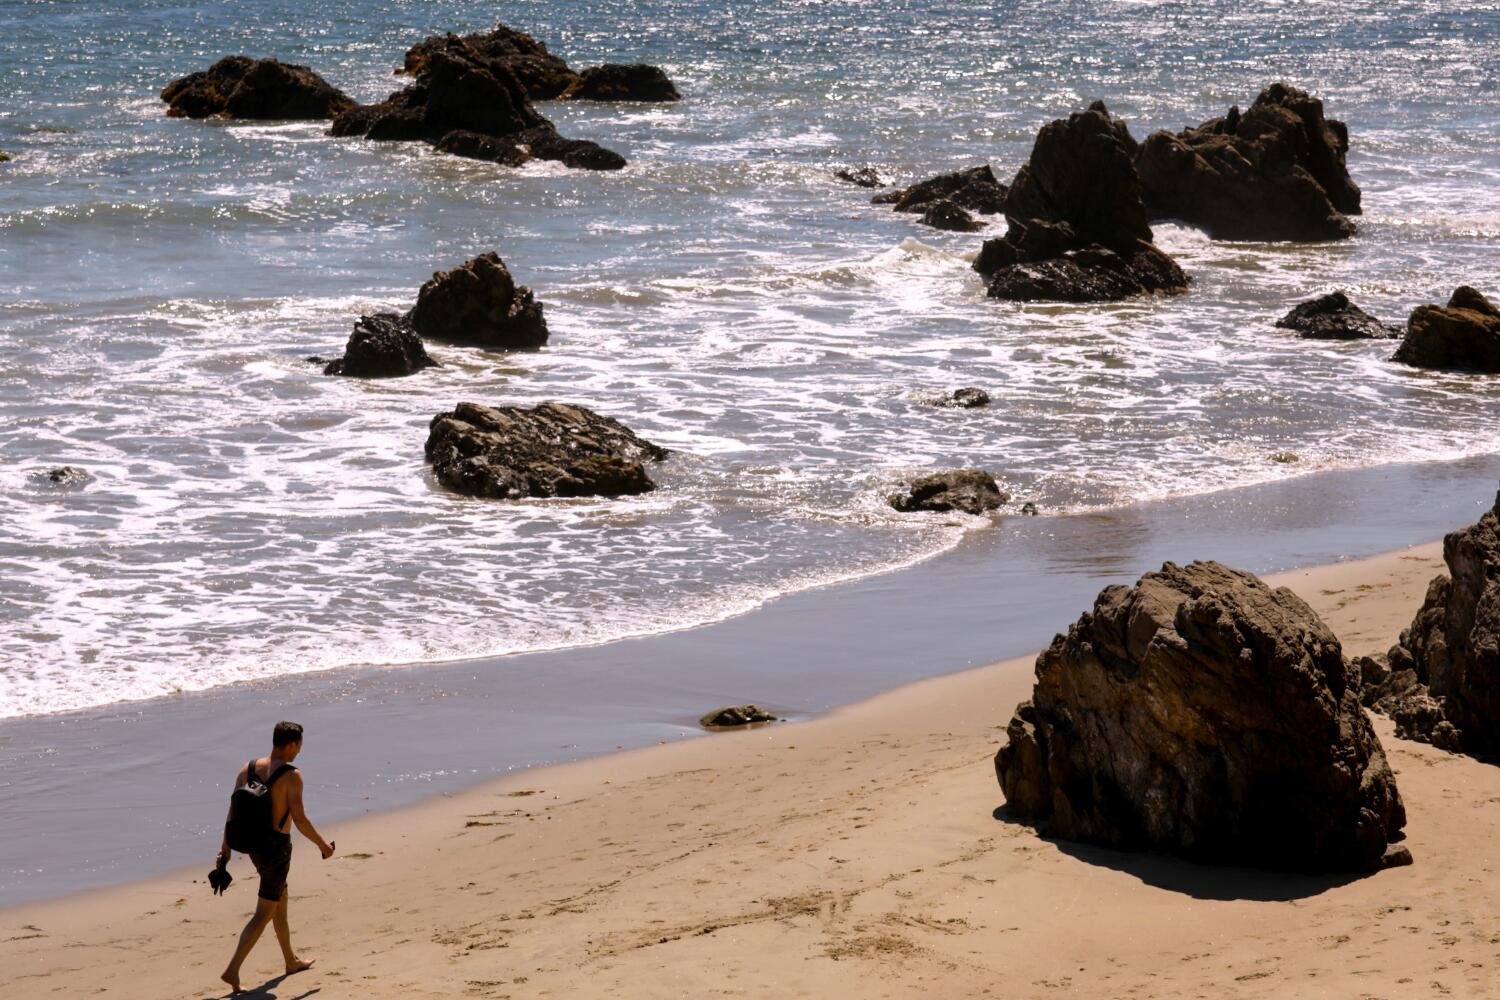 'Get out of here!' Pair of TikTok videos reignite debate over access to California beaches